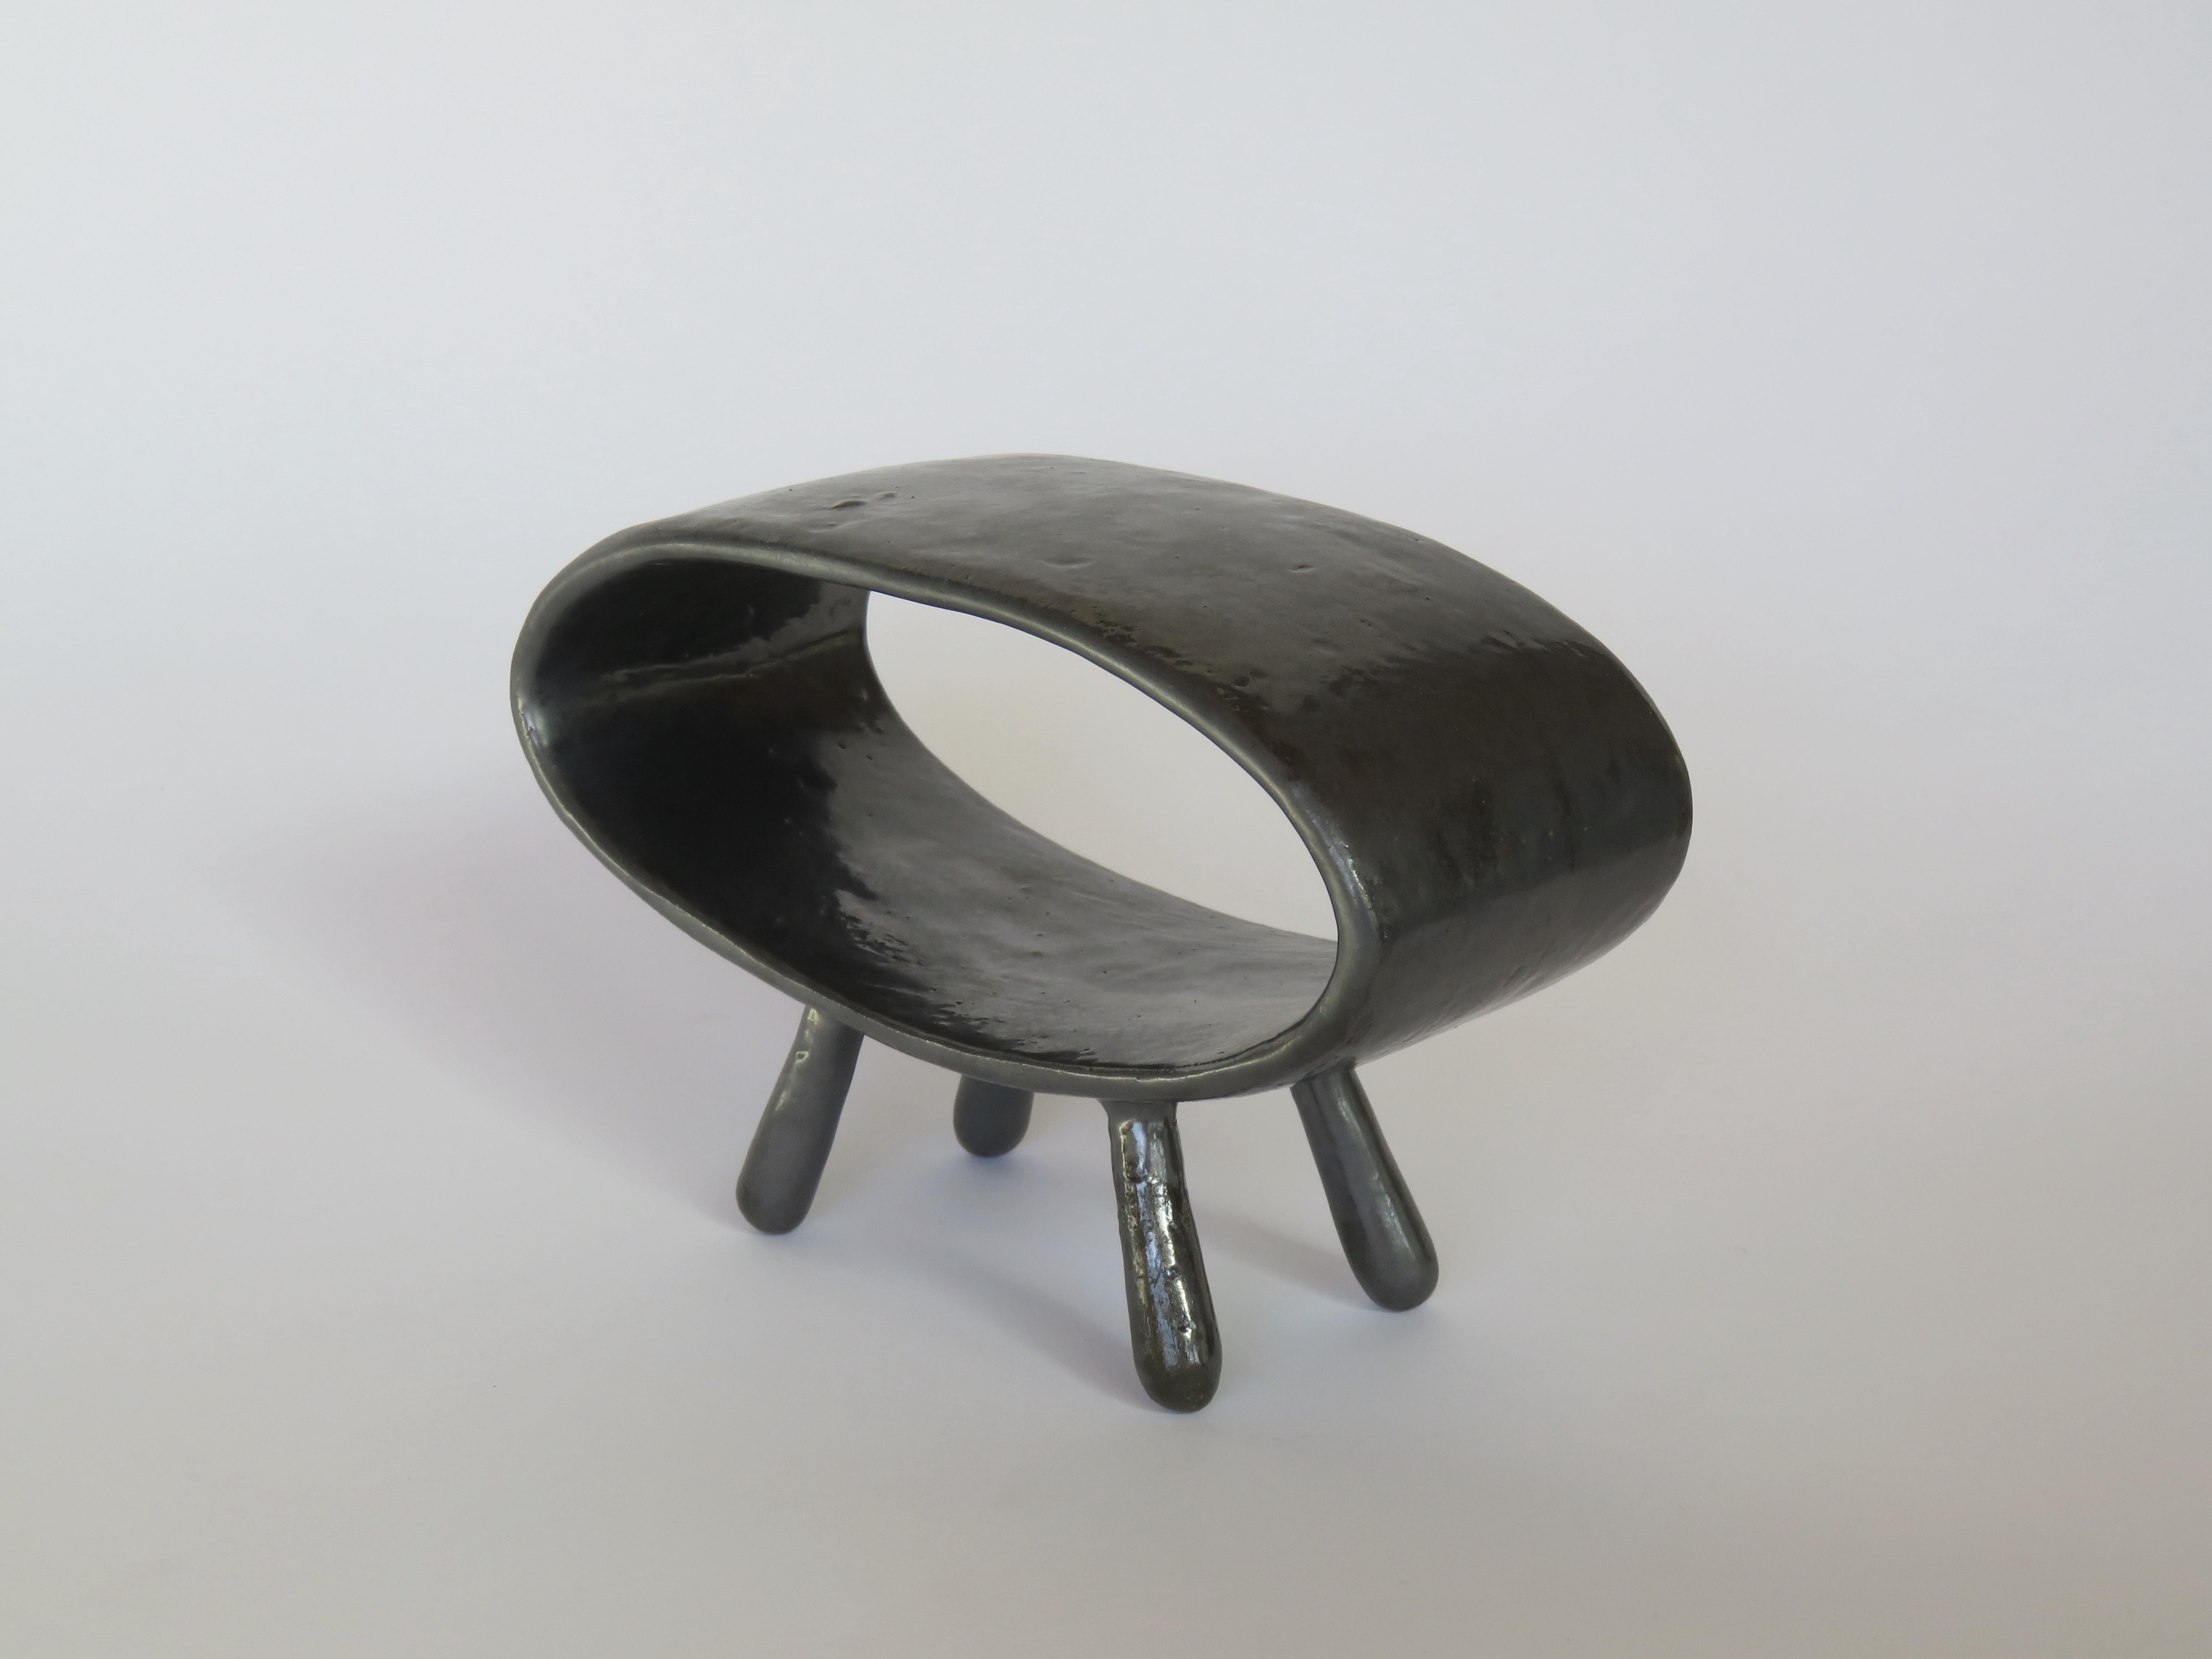 A hollow pointed oval sculpture on 4 legs. Part of a new series of related pieces, a sculptural 